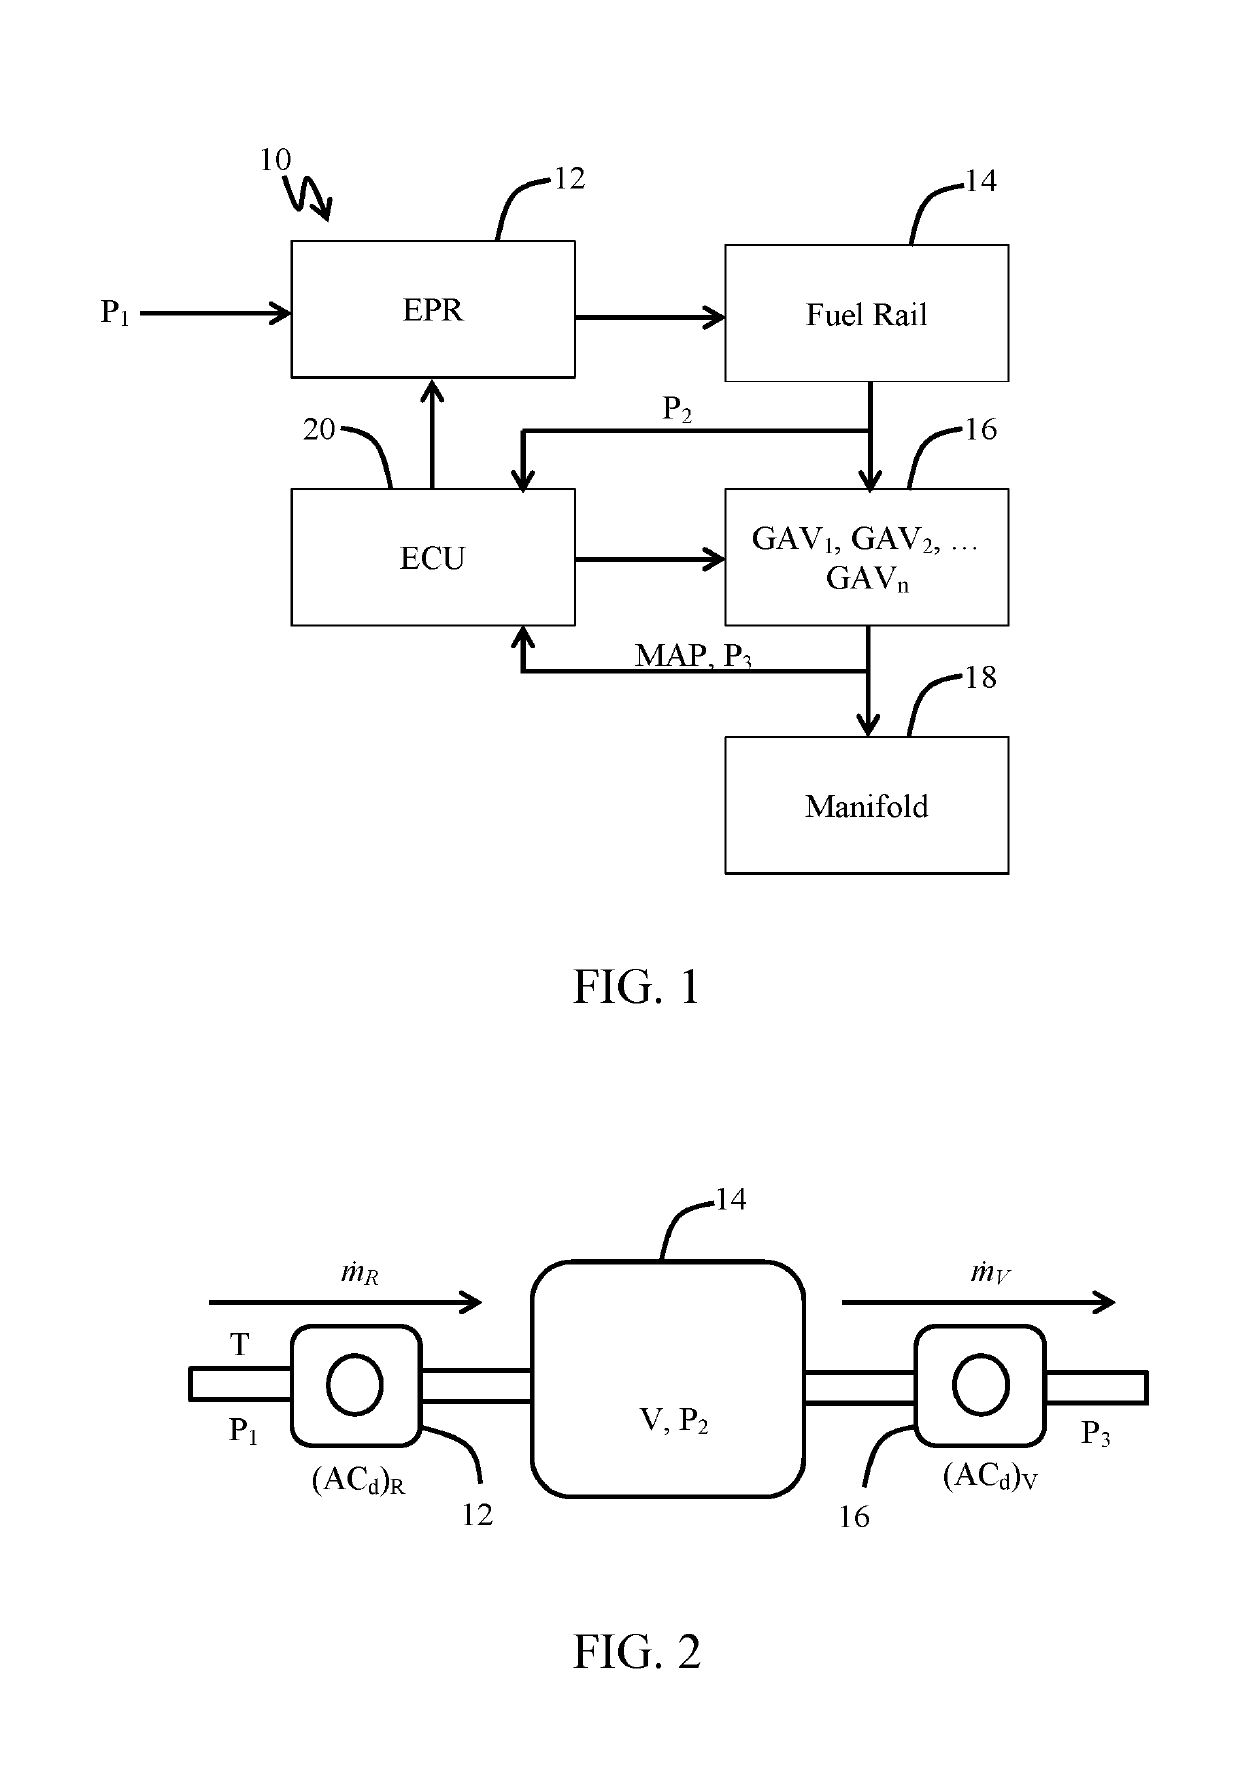 Pressure regulating mass flow system for multipoint gaseous fuel injection